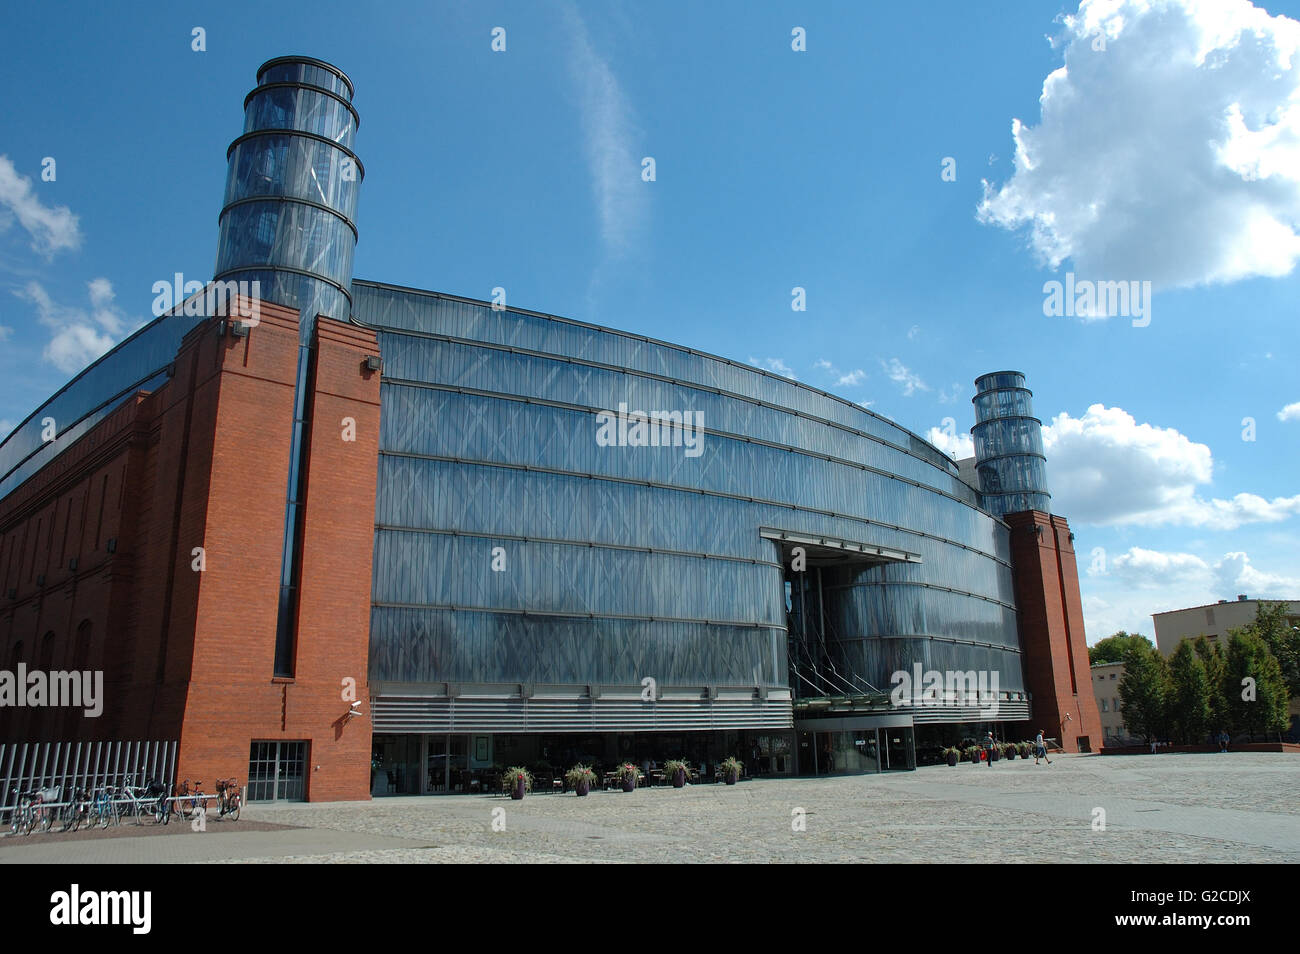 Poznan, Poland - July 13, 2014: Front of Stary Browar shopping centre modern building in Poznan, Poland. Unidentified people in Stock Photo